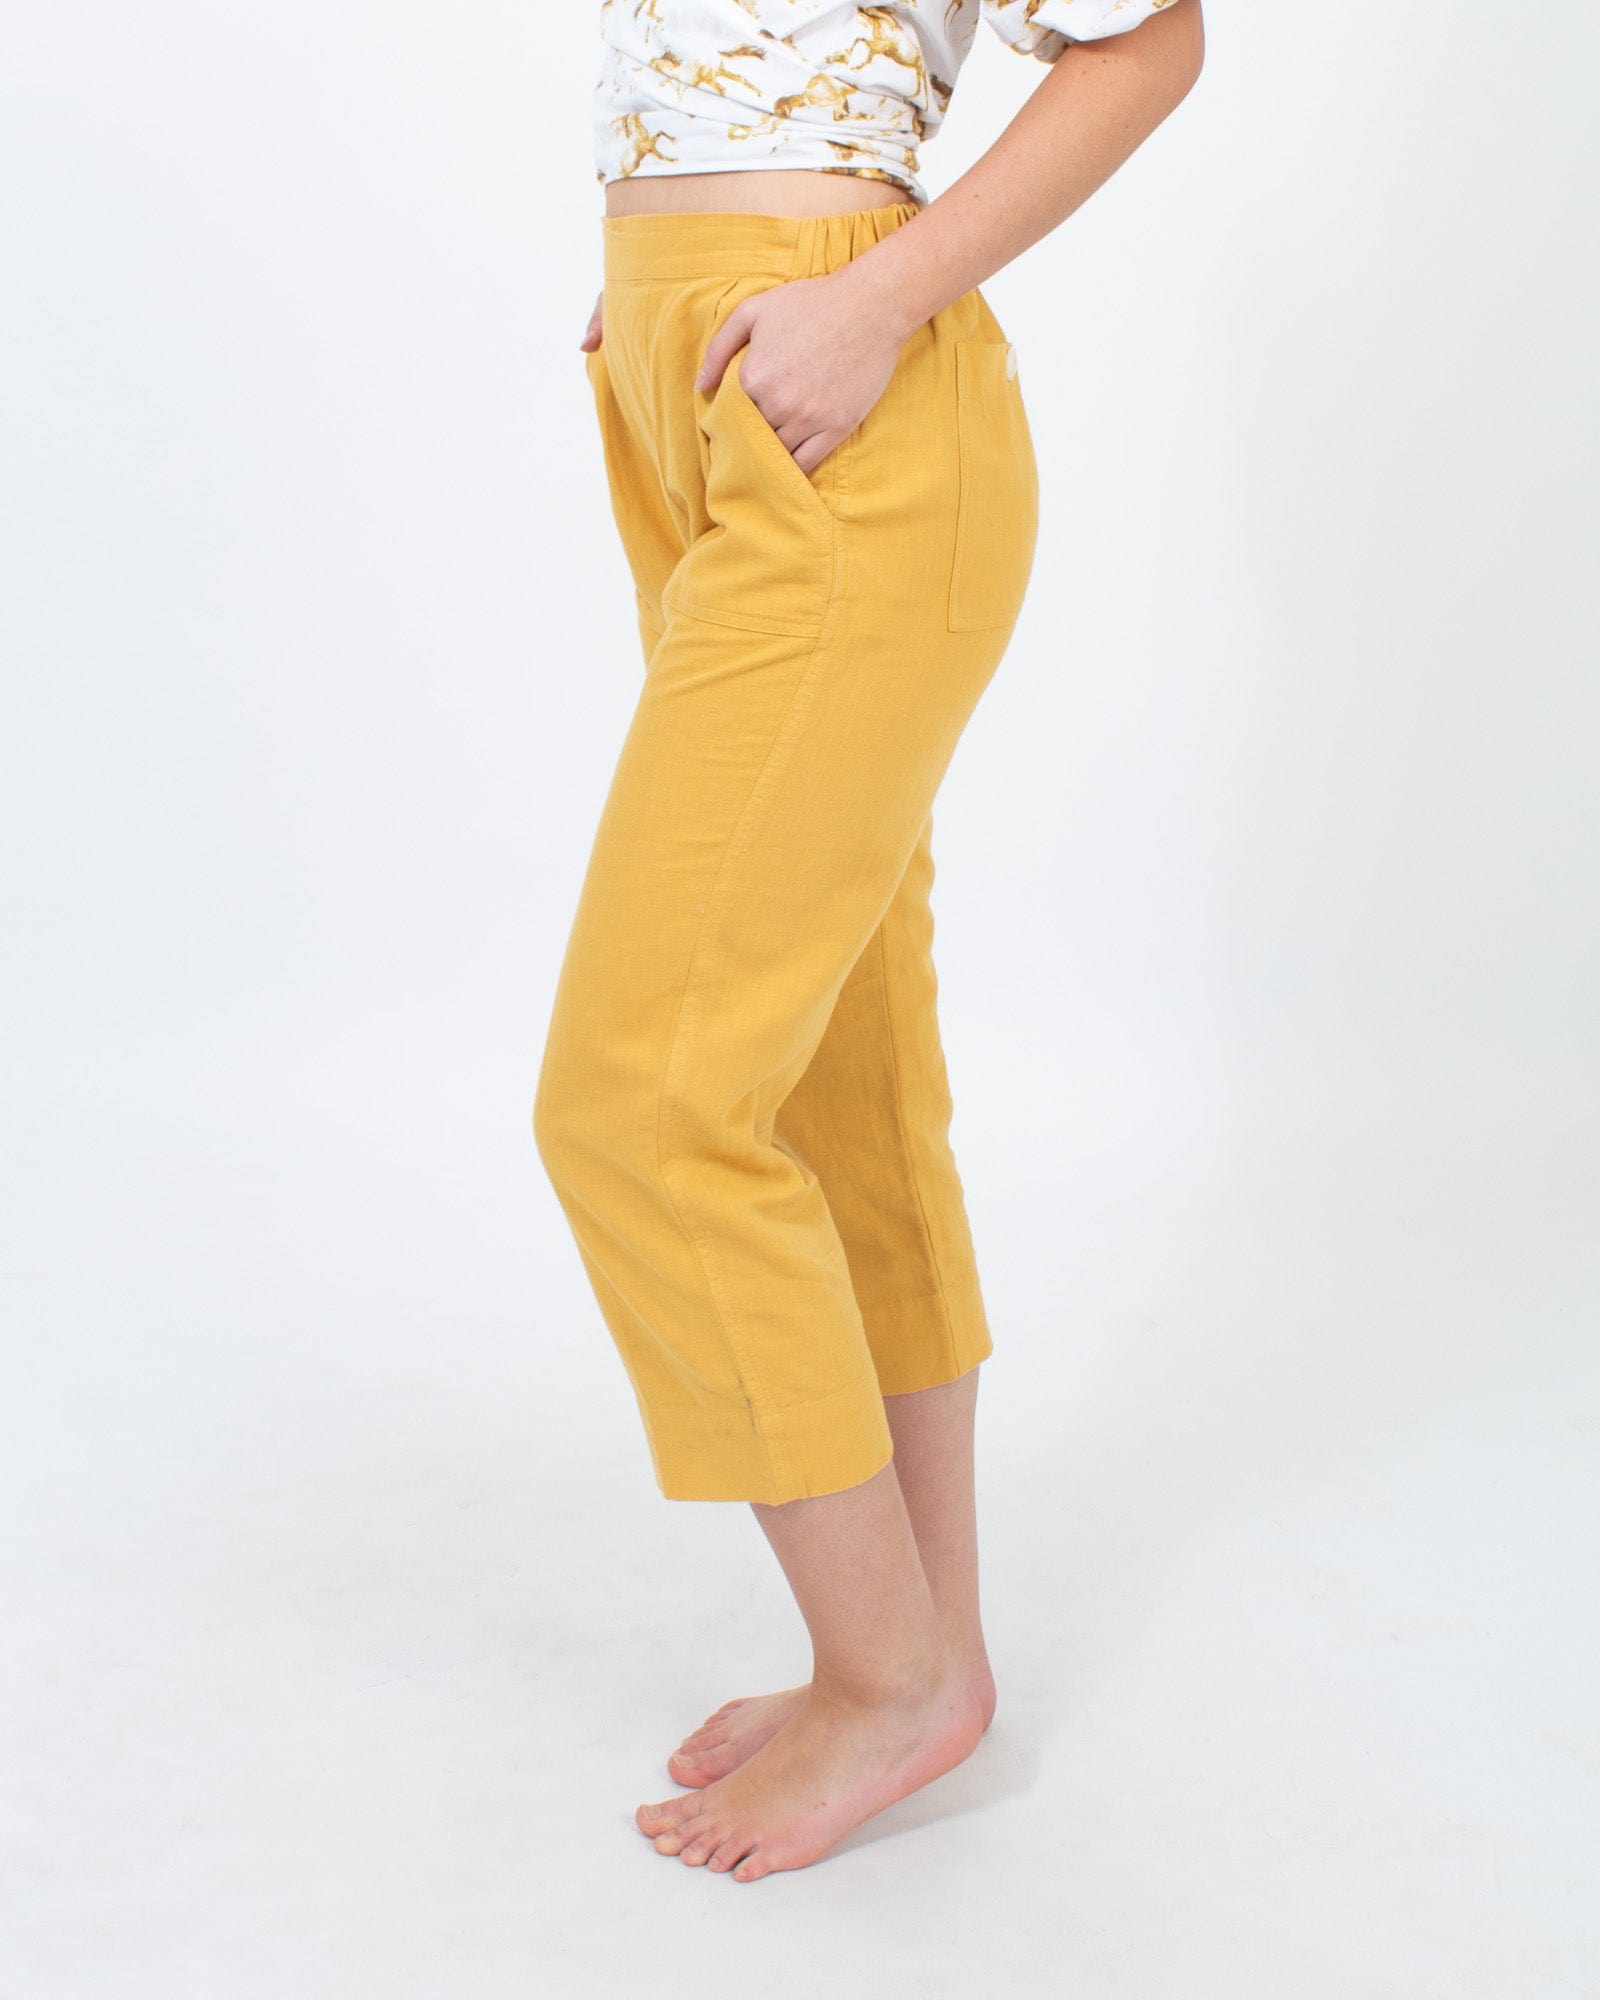 Buy Cotton Flex Stretchable Slim Fit Straight Casual Cigarette Pants Trouser  for Girls Ladies Women Yellow at Amazon.in